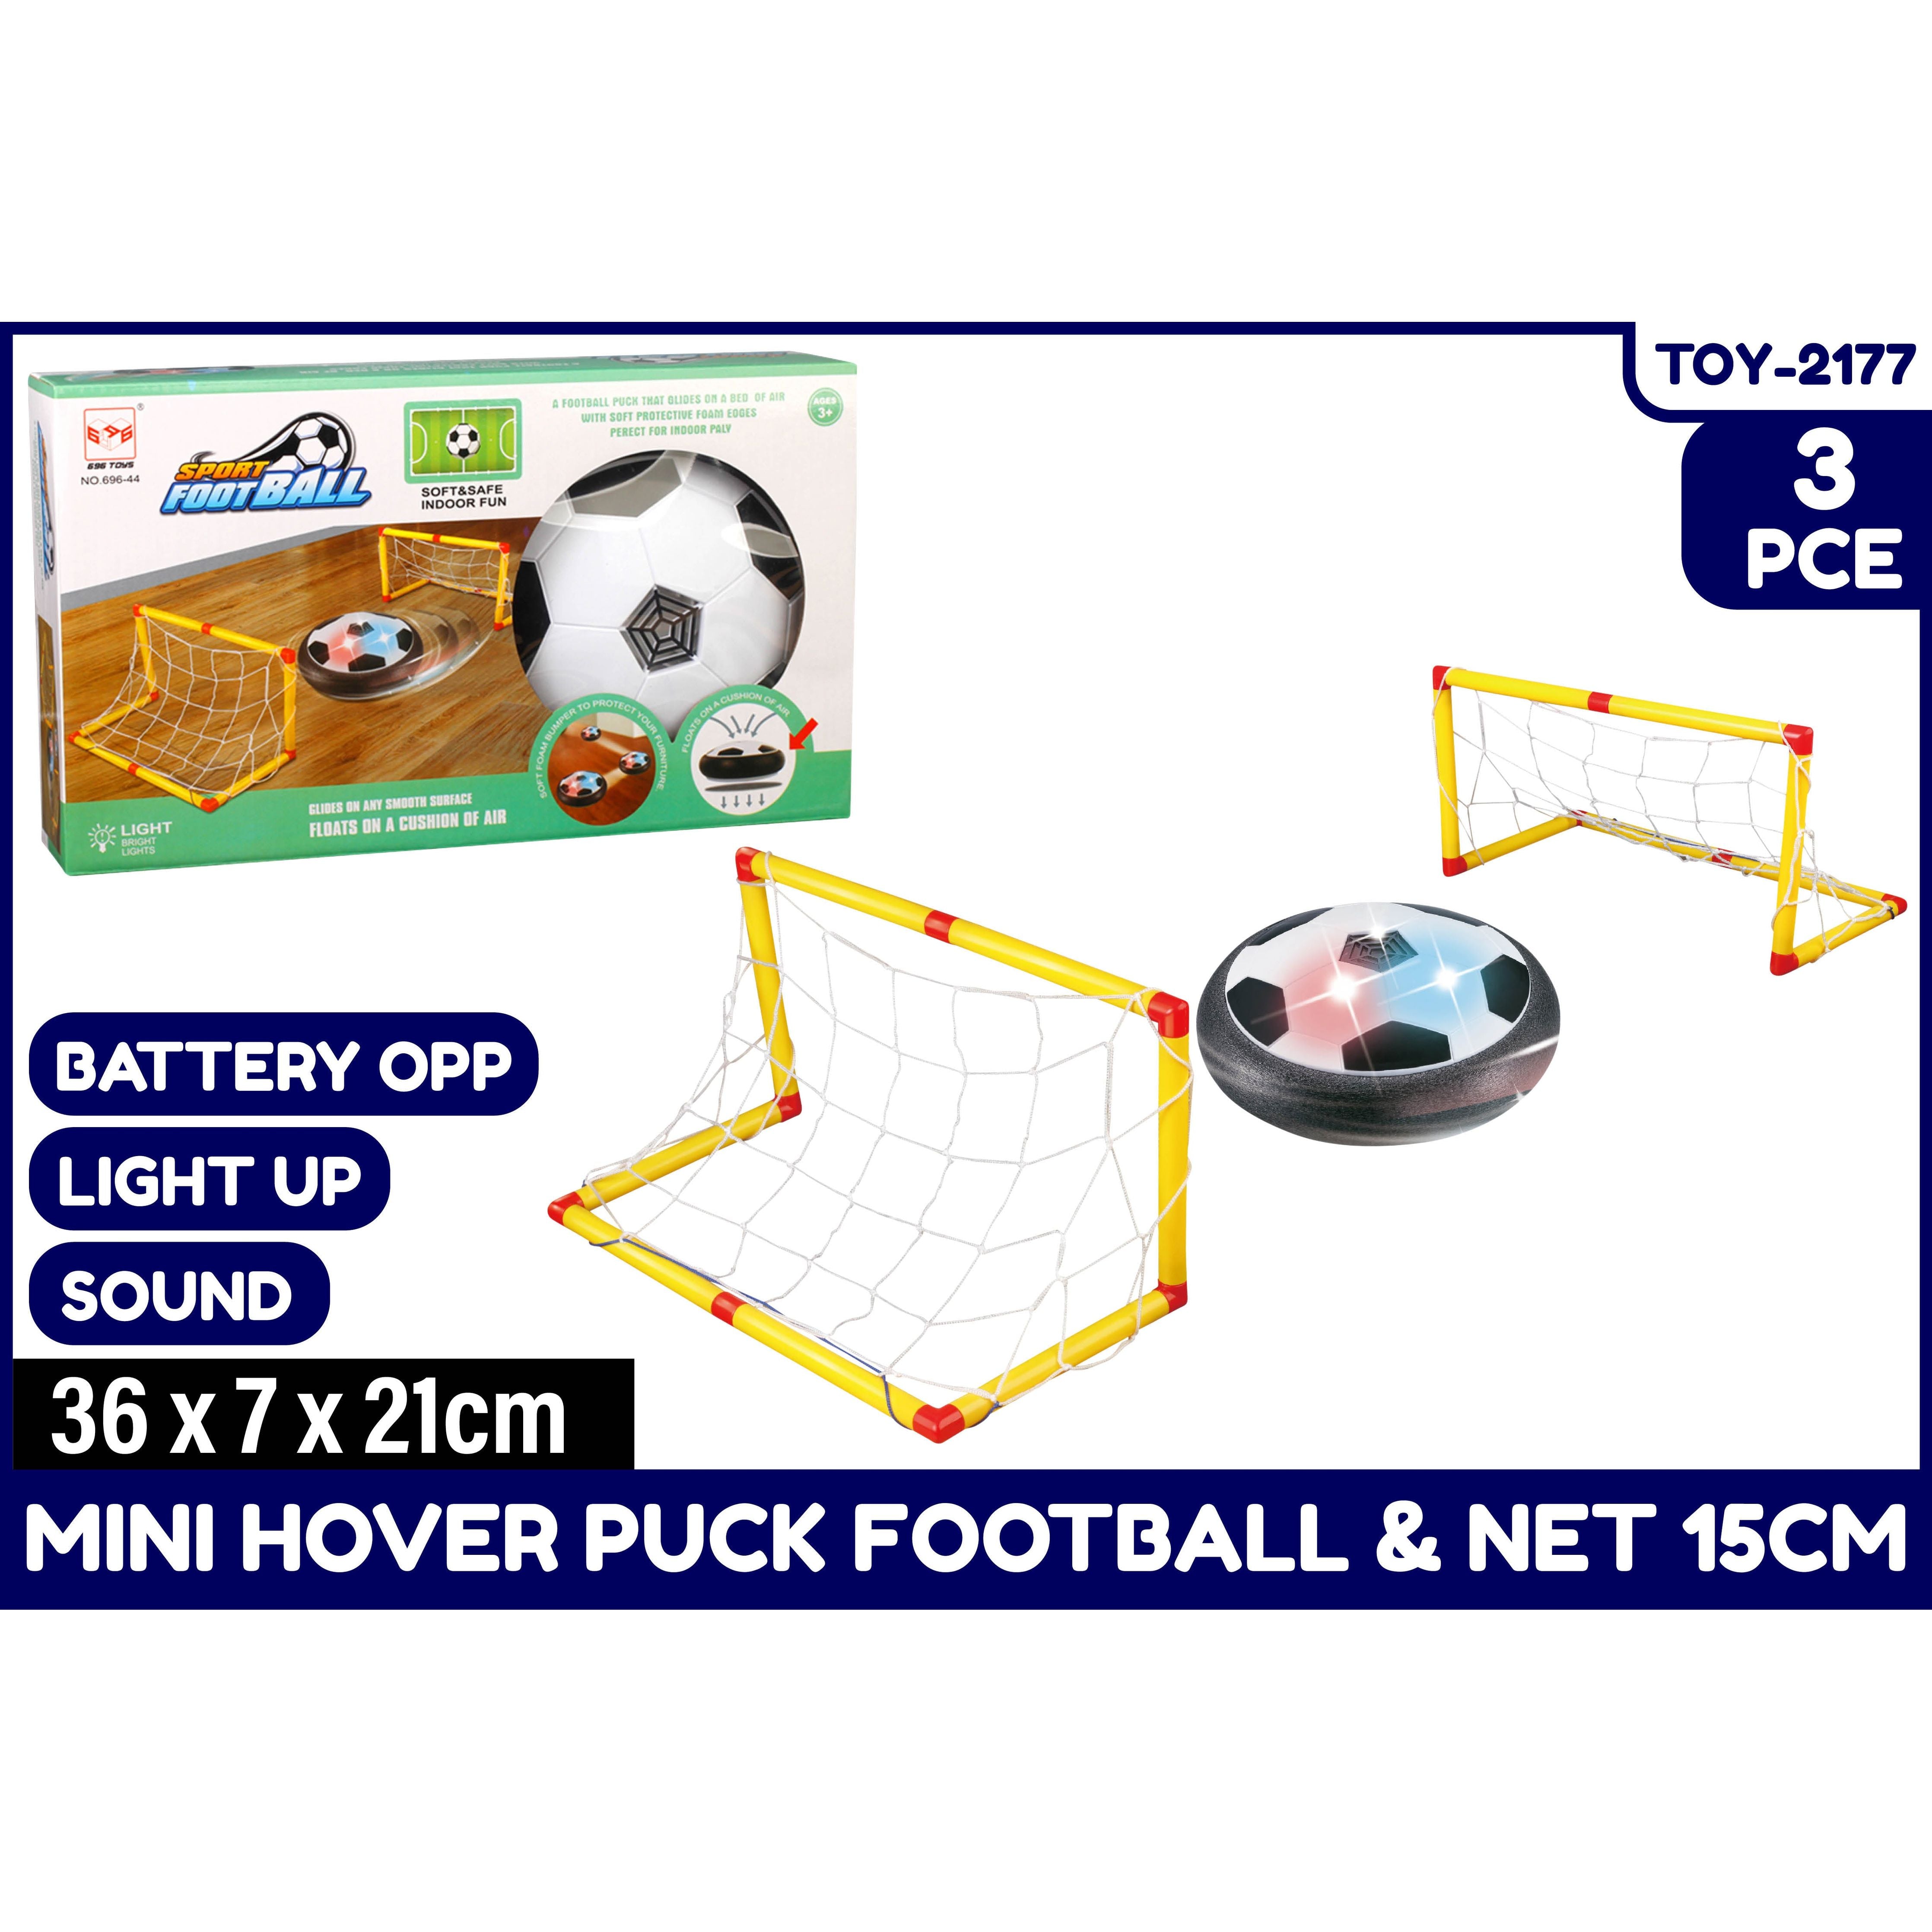 Mini Hover Football & Net Battery Operated 15cm - Dollars and Sense